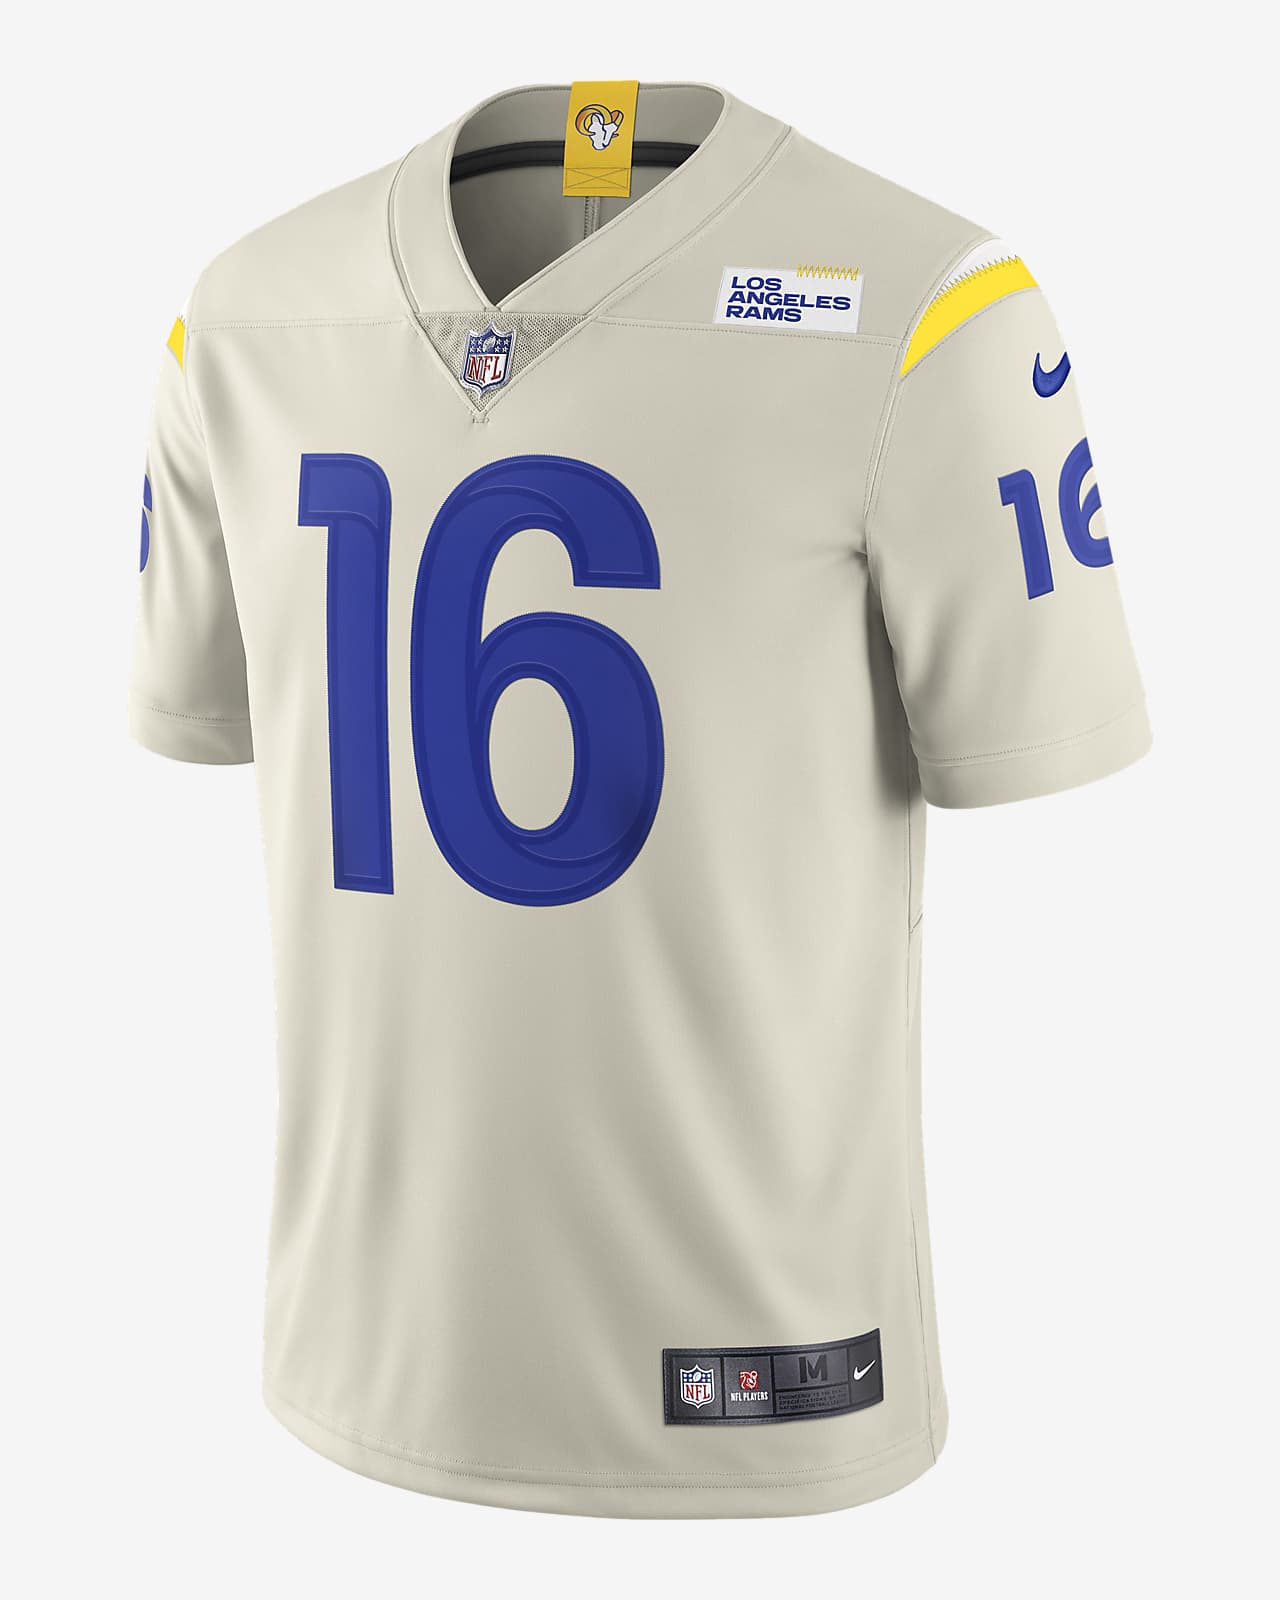 rams goff jersey